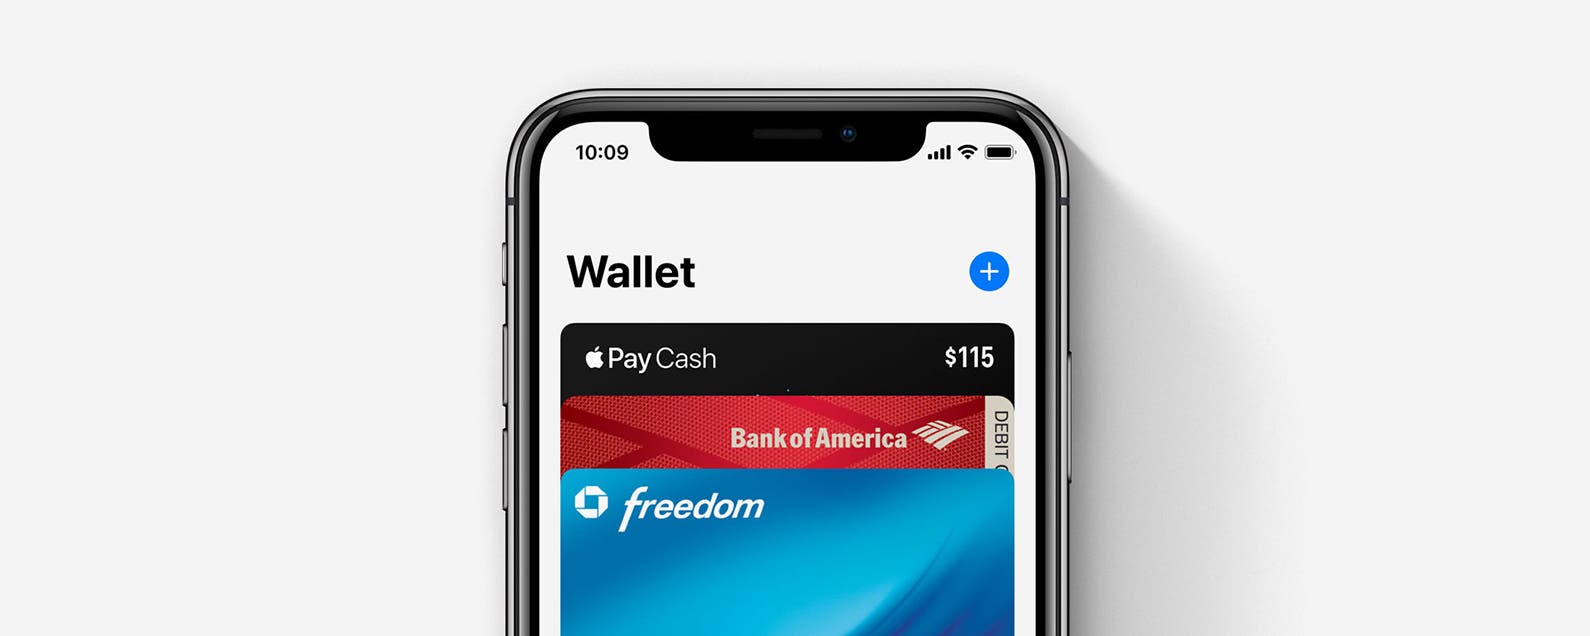 How to Change Your Apple Pay Payment Preferences on the iPhone